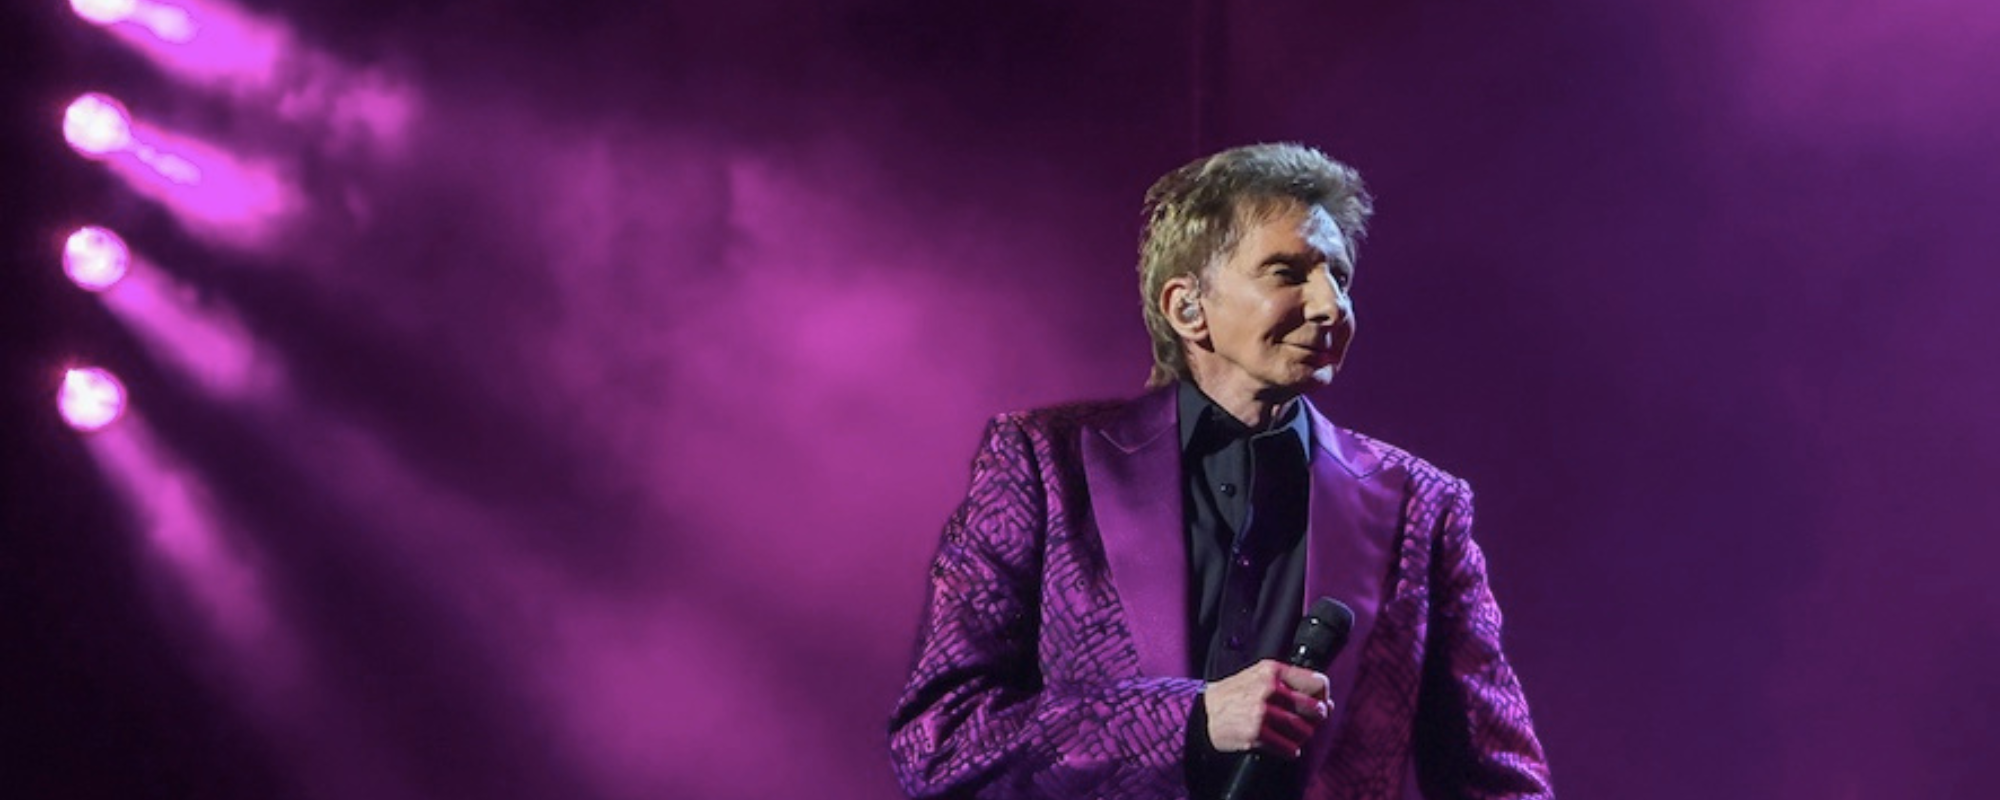 Barry Manilow has Composed his First Musical with ‘Harmony,’ Opening on Broadway in 2 Weeks